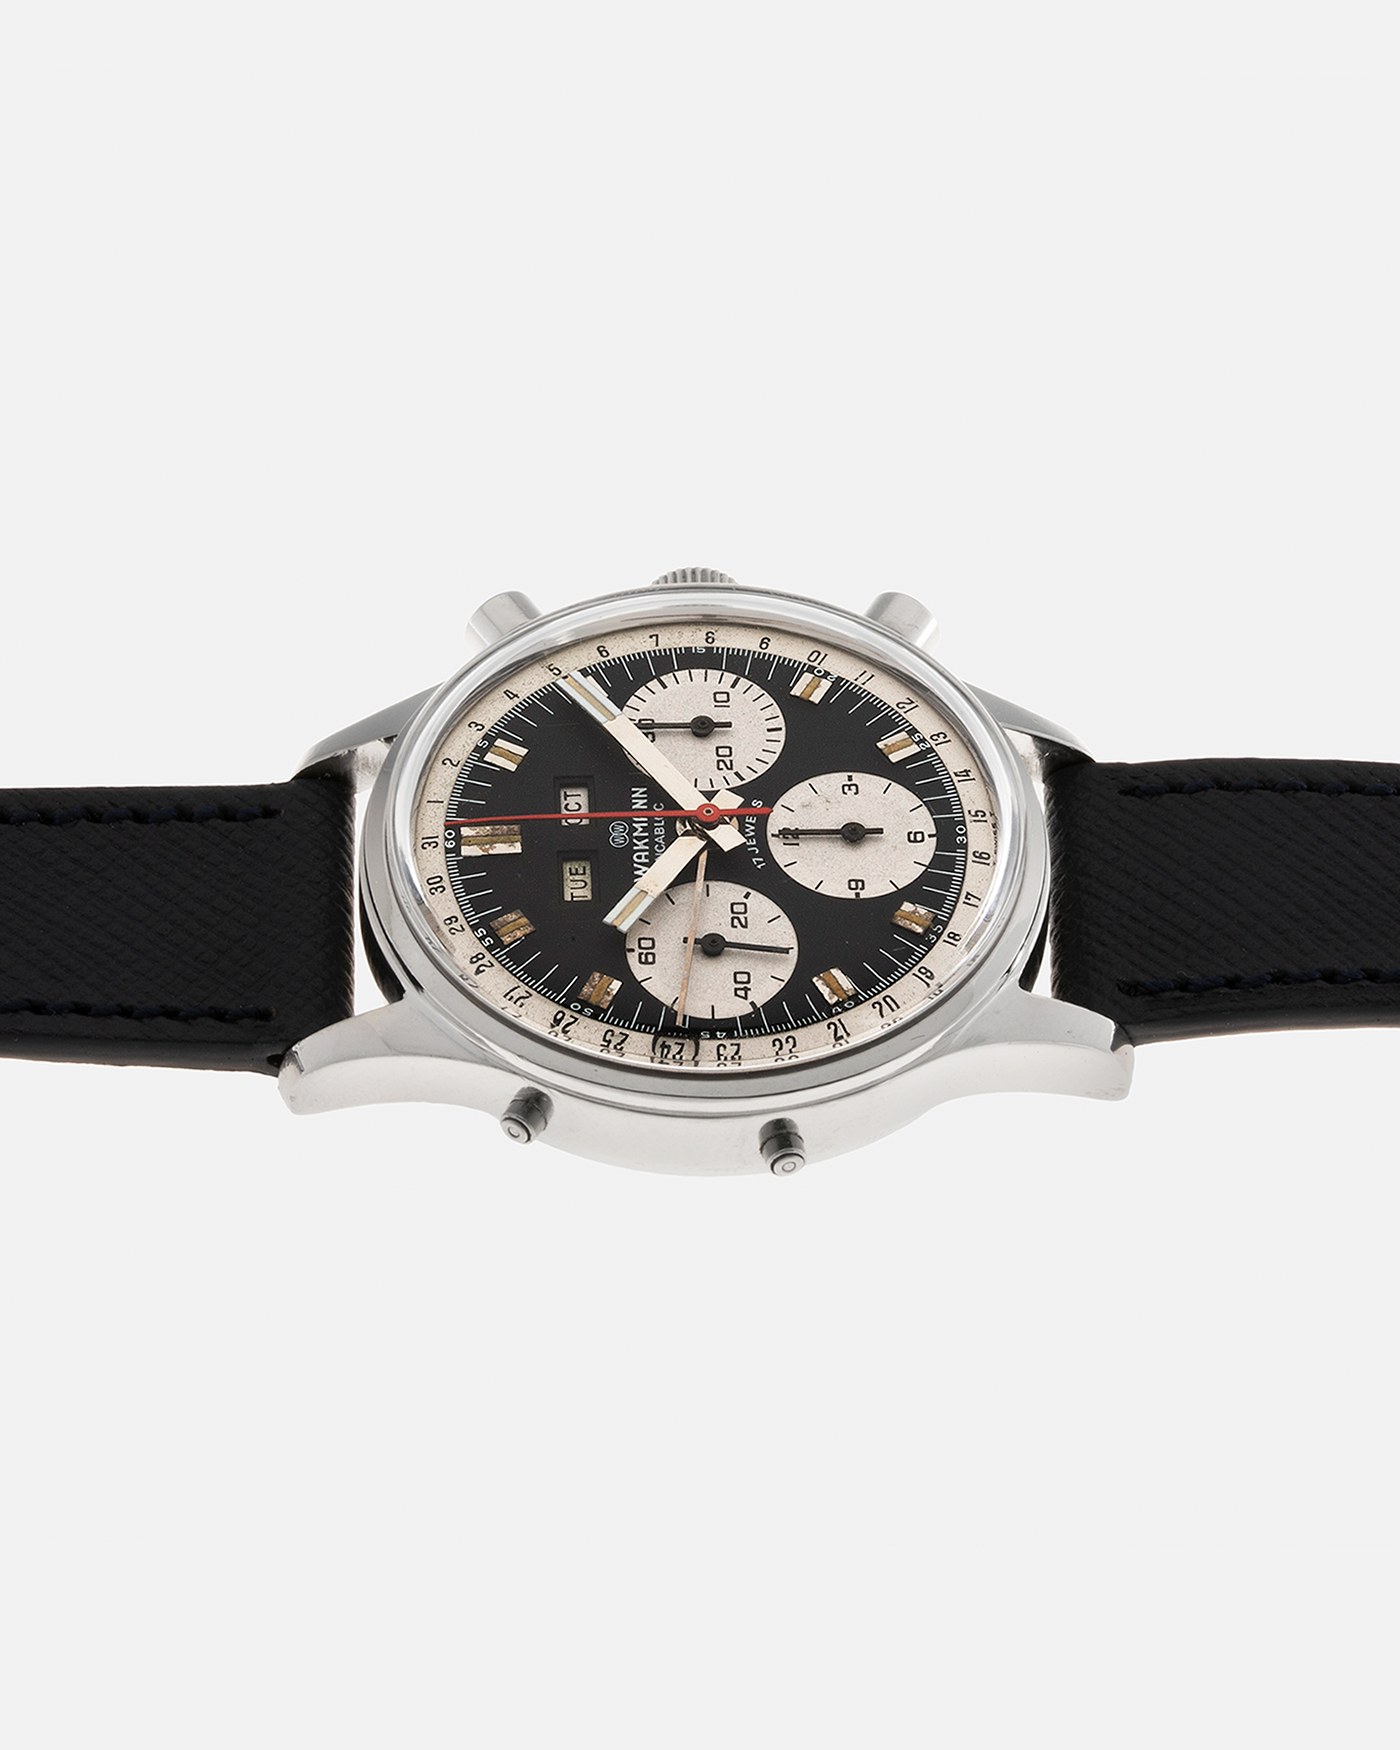 Brand: Wakmann Year: 1970’s Model: Triple Calendar Chronograph Reference Number: 71.1309.70 Material: Stainless Steel Movement: Valjoux Cal. 723, Manual-Winding Case Diameter: 37mm Lug Width: 20mm Strap: Molequin Navy Blue Textured Calf Leather Strap